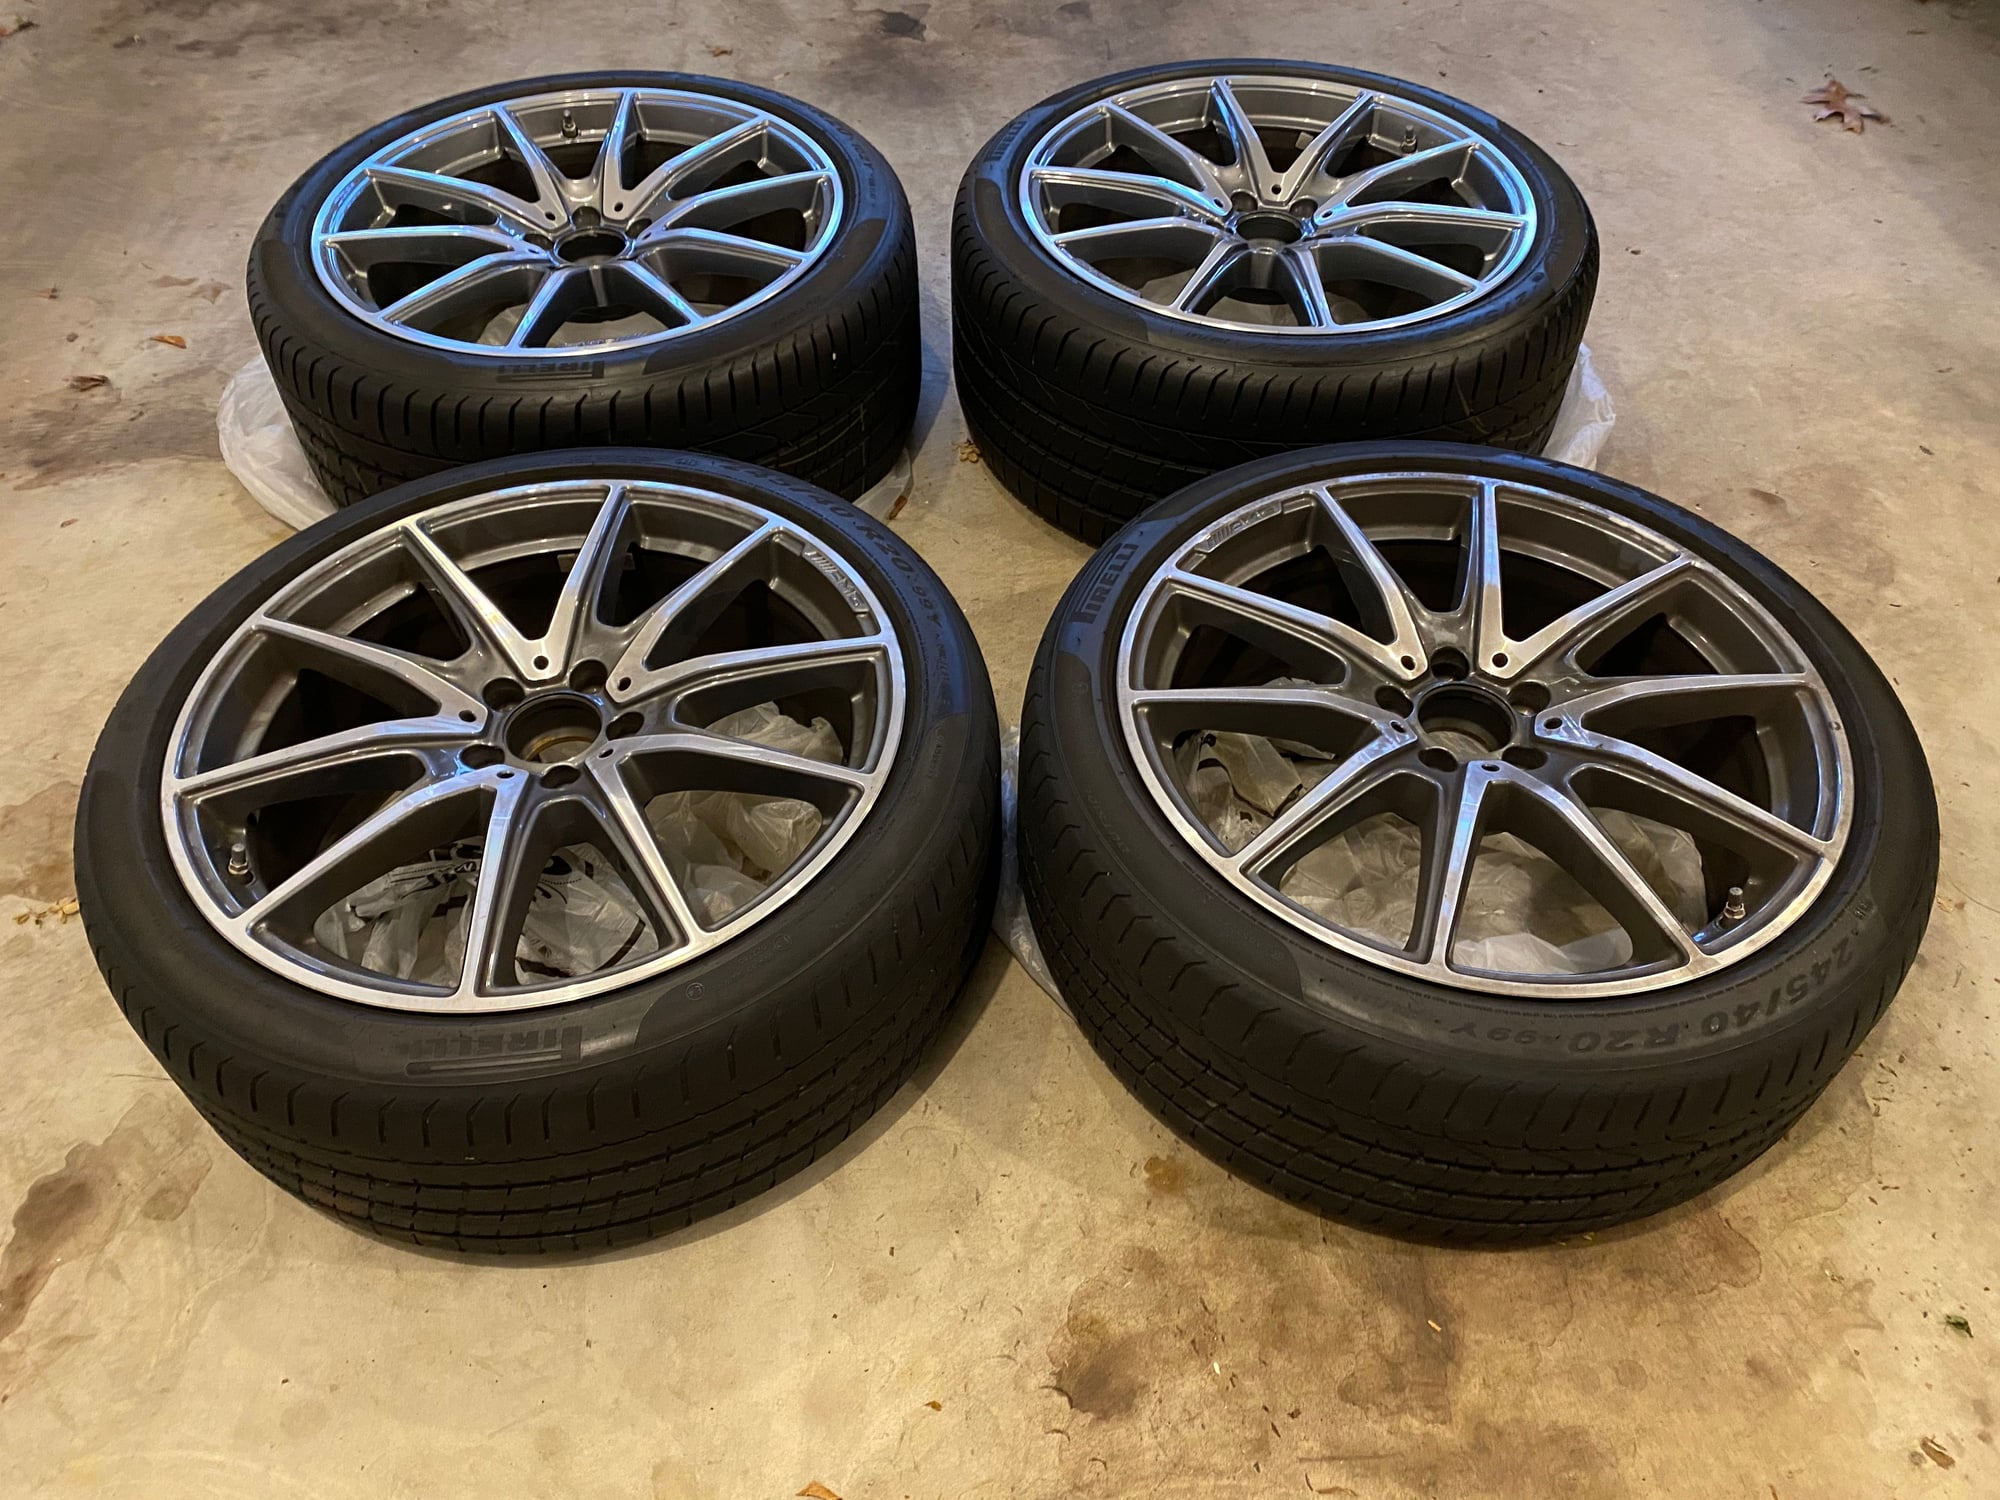 Wheels and Tires/Axles - FS: 2018+ AMG OEM wheels (direct from Germany) from S550 4matic - $3850 - Used - 2014 to 2020 Mercedes-Benz S550 - 2018 to 2020 Mercedes-Benz S450 - 2018 to 2020 Mercedes-Benz S560 - 2014 to 2020 Mercedes-Benz S63 AMG - Westport, CT 06880, United States